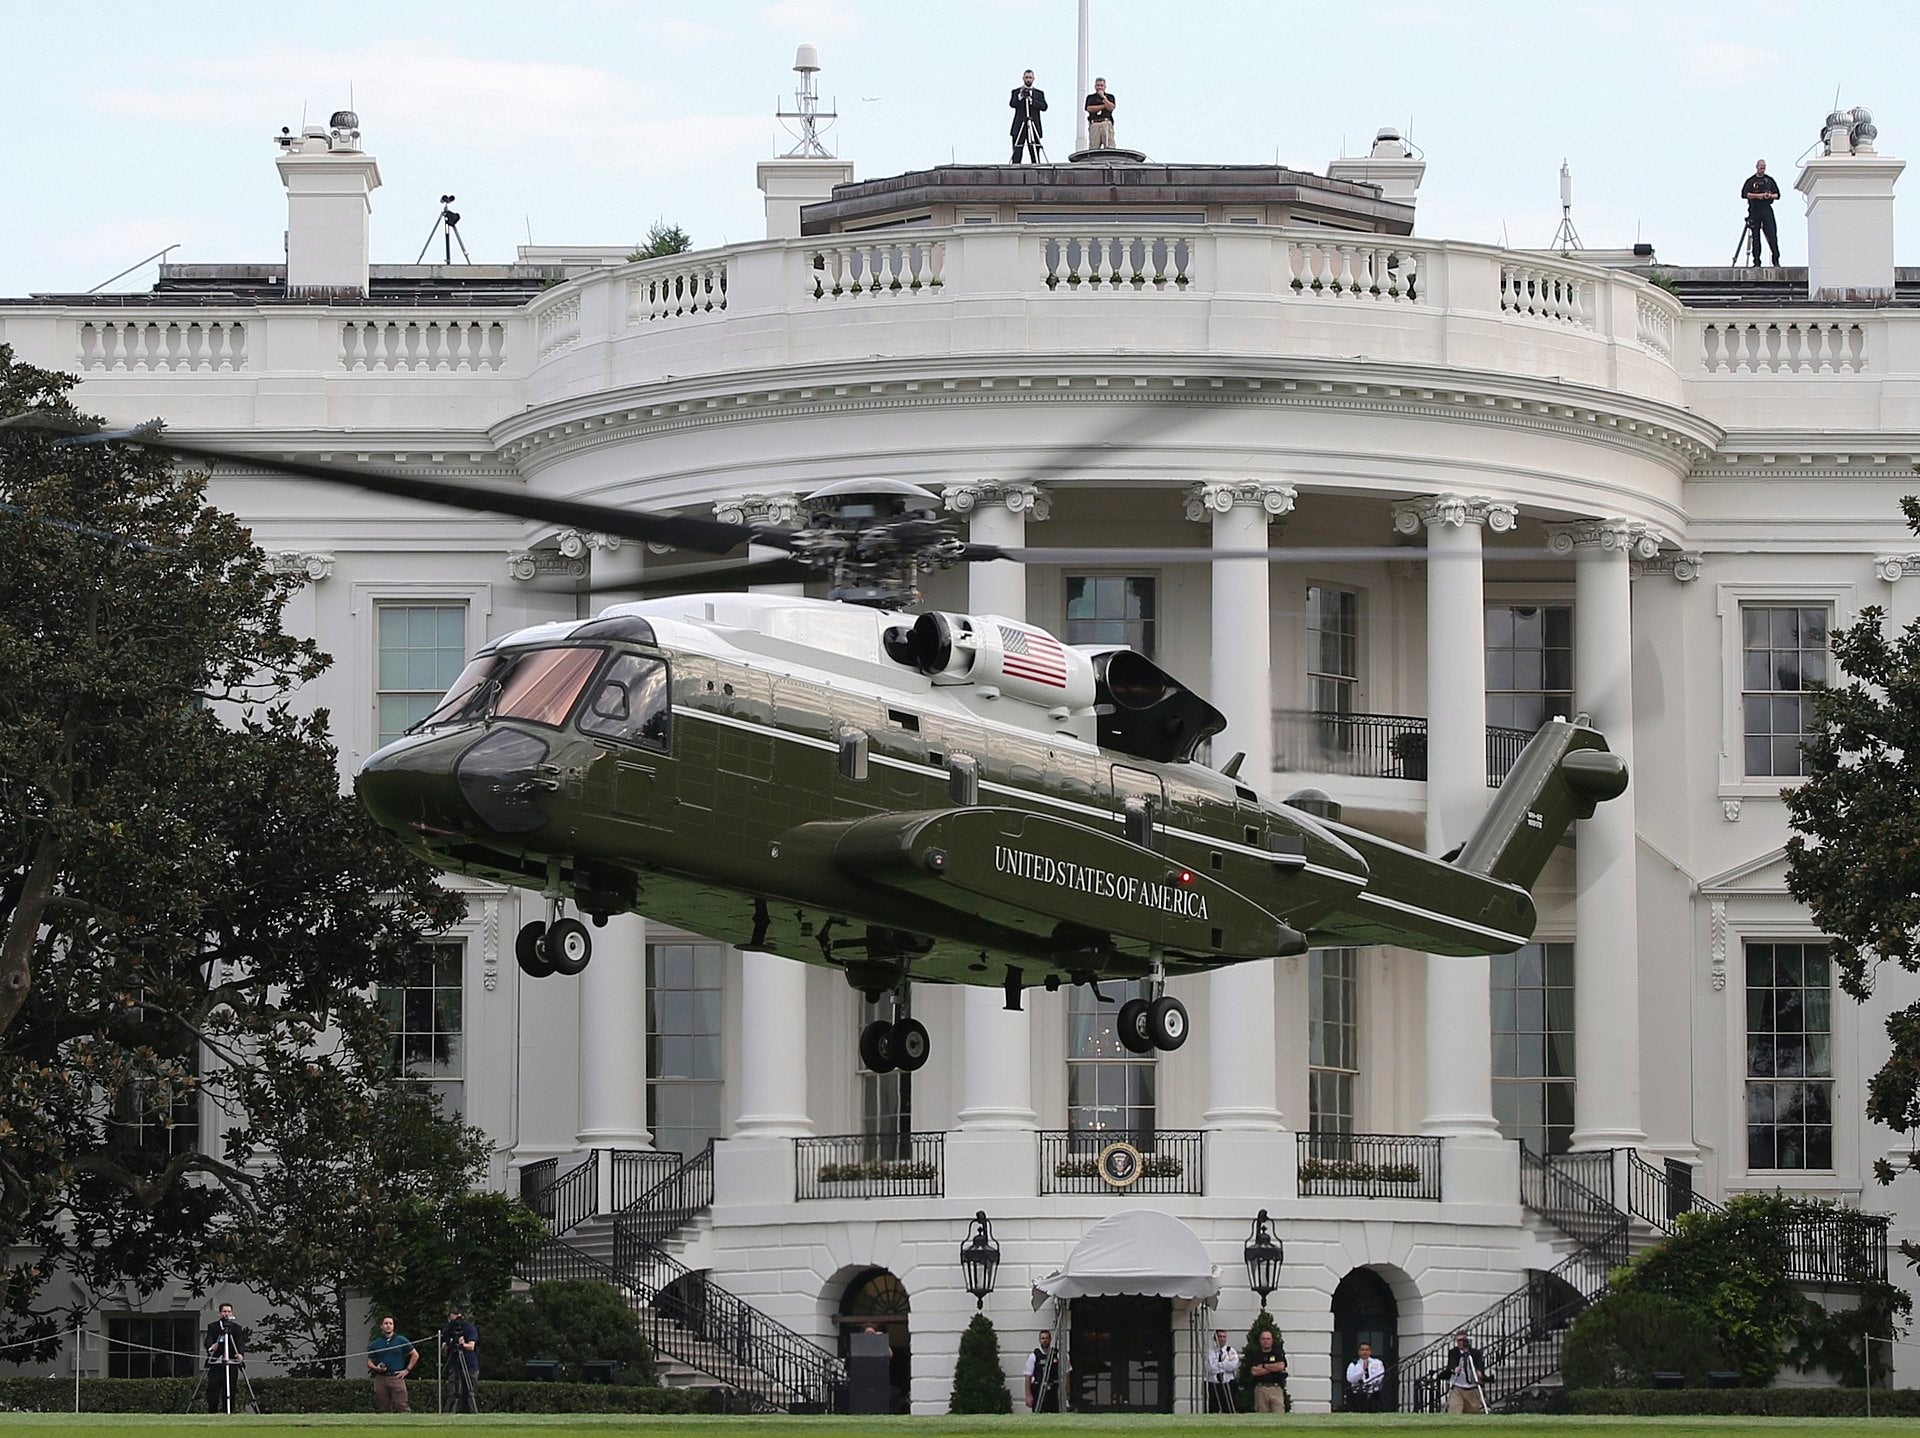 180922-M-ZY870-531 WASHINGTON (Sept. 22, 2018) Marine Helicopter Squadron (HMX) 1 conducts test flights of the new VH-92A helicopter over the South Lawn of the White House, Sept. 22, 2018, in Washington, D.C. (U.S. Marine Corps photo by Sgt. Hunter Helis/Released)